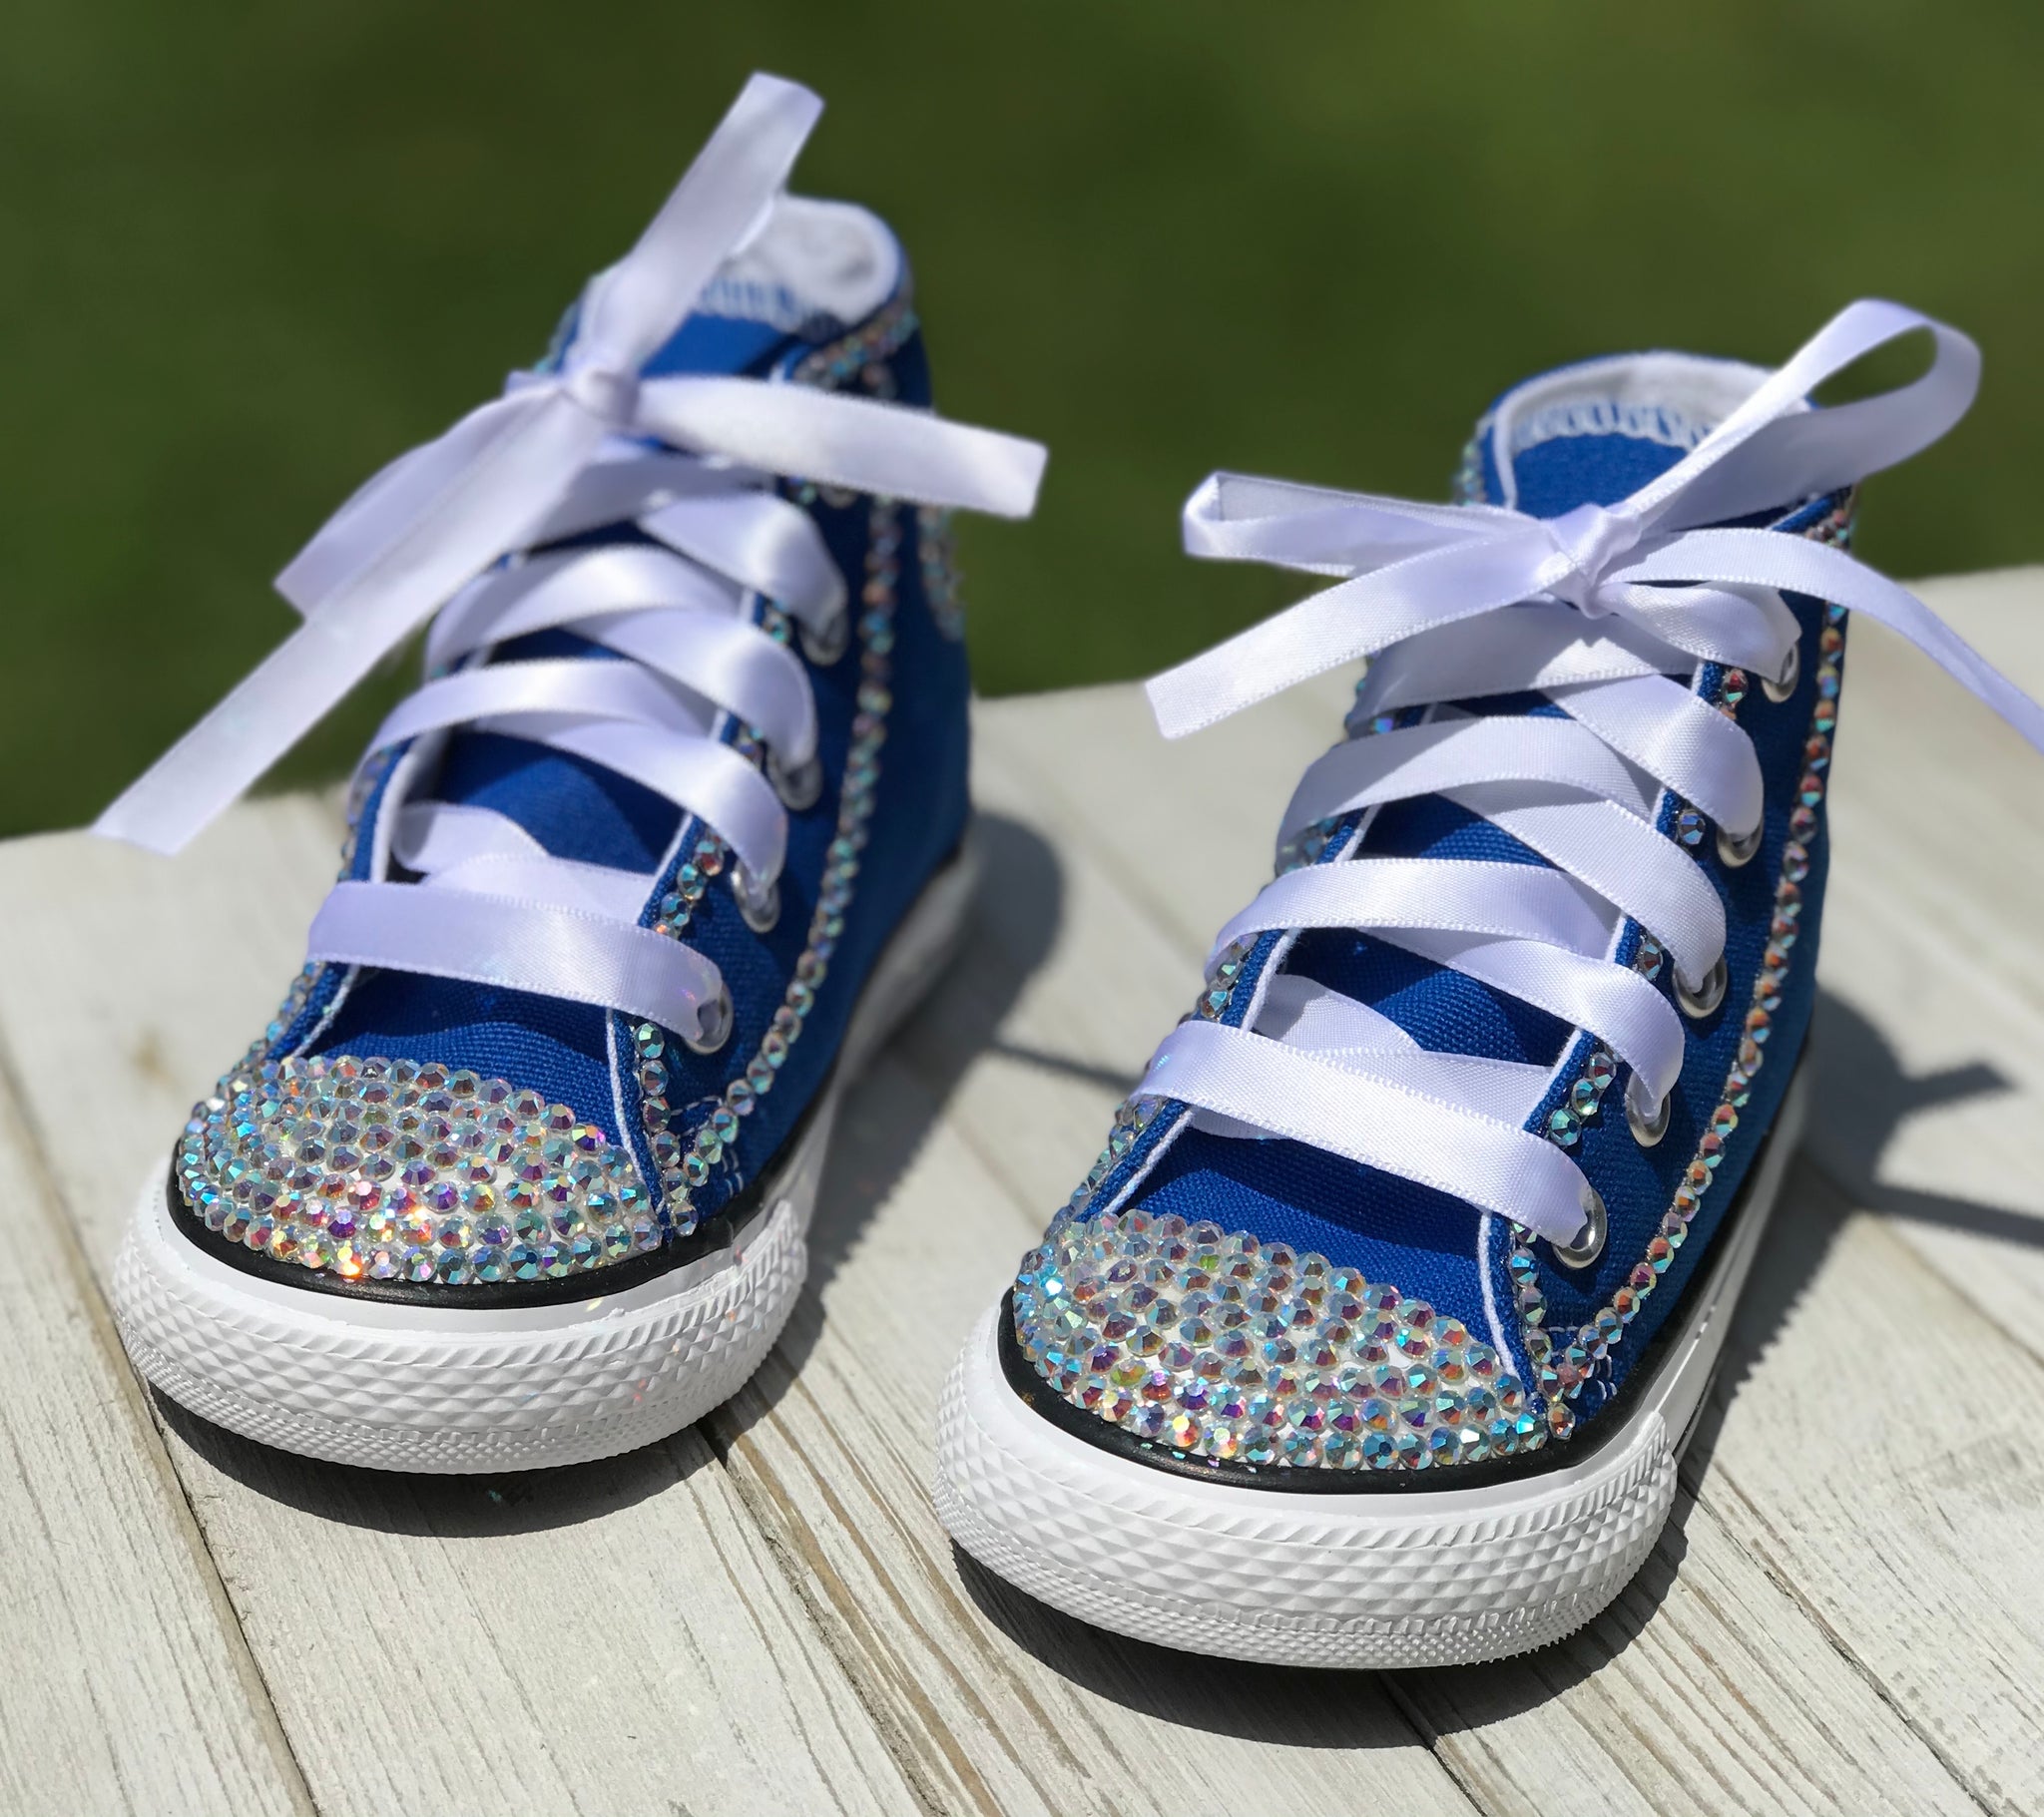 Blue Converse Bling Sneakers, Infants and Toddler Shoe 2-9 (Hard | Little Ladybug Tutus